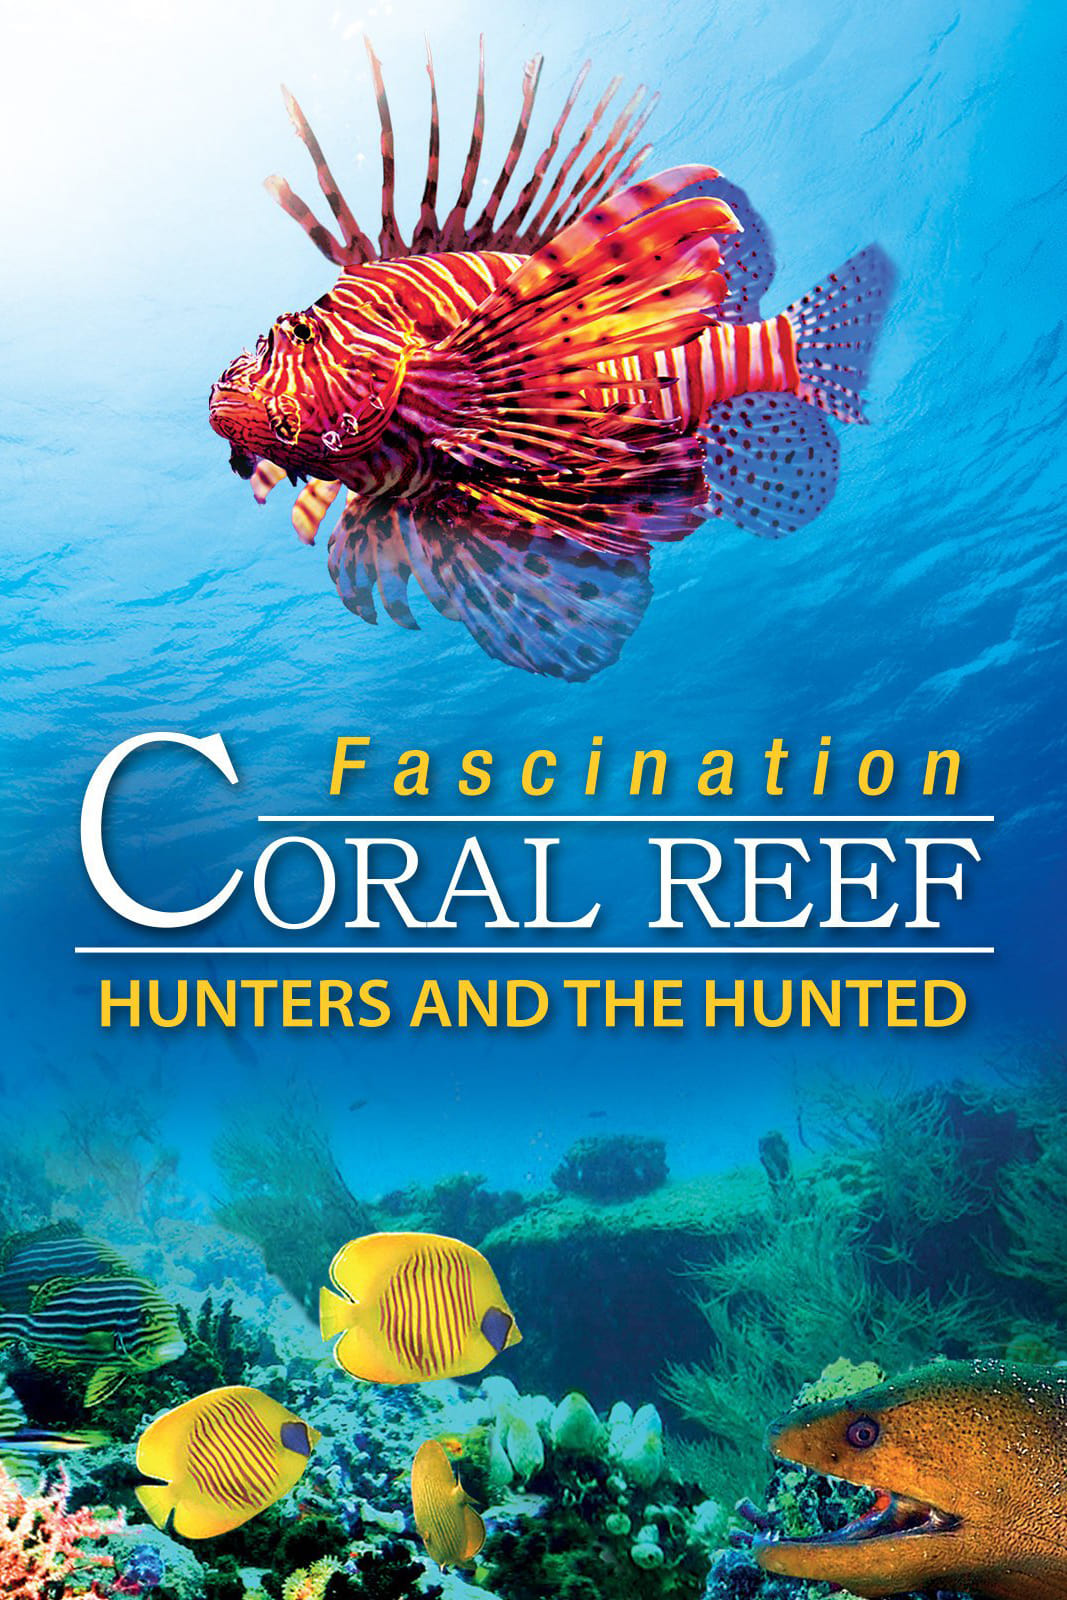 Fascination Coral Reef: Hunters and the Hunted